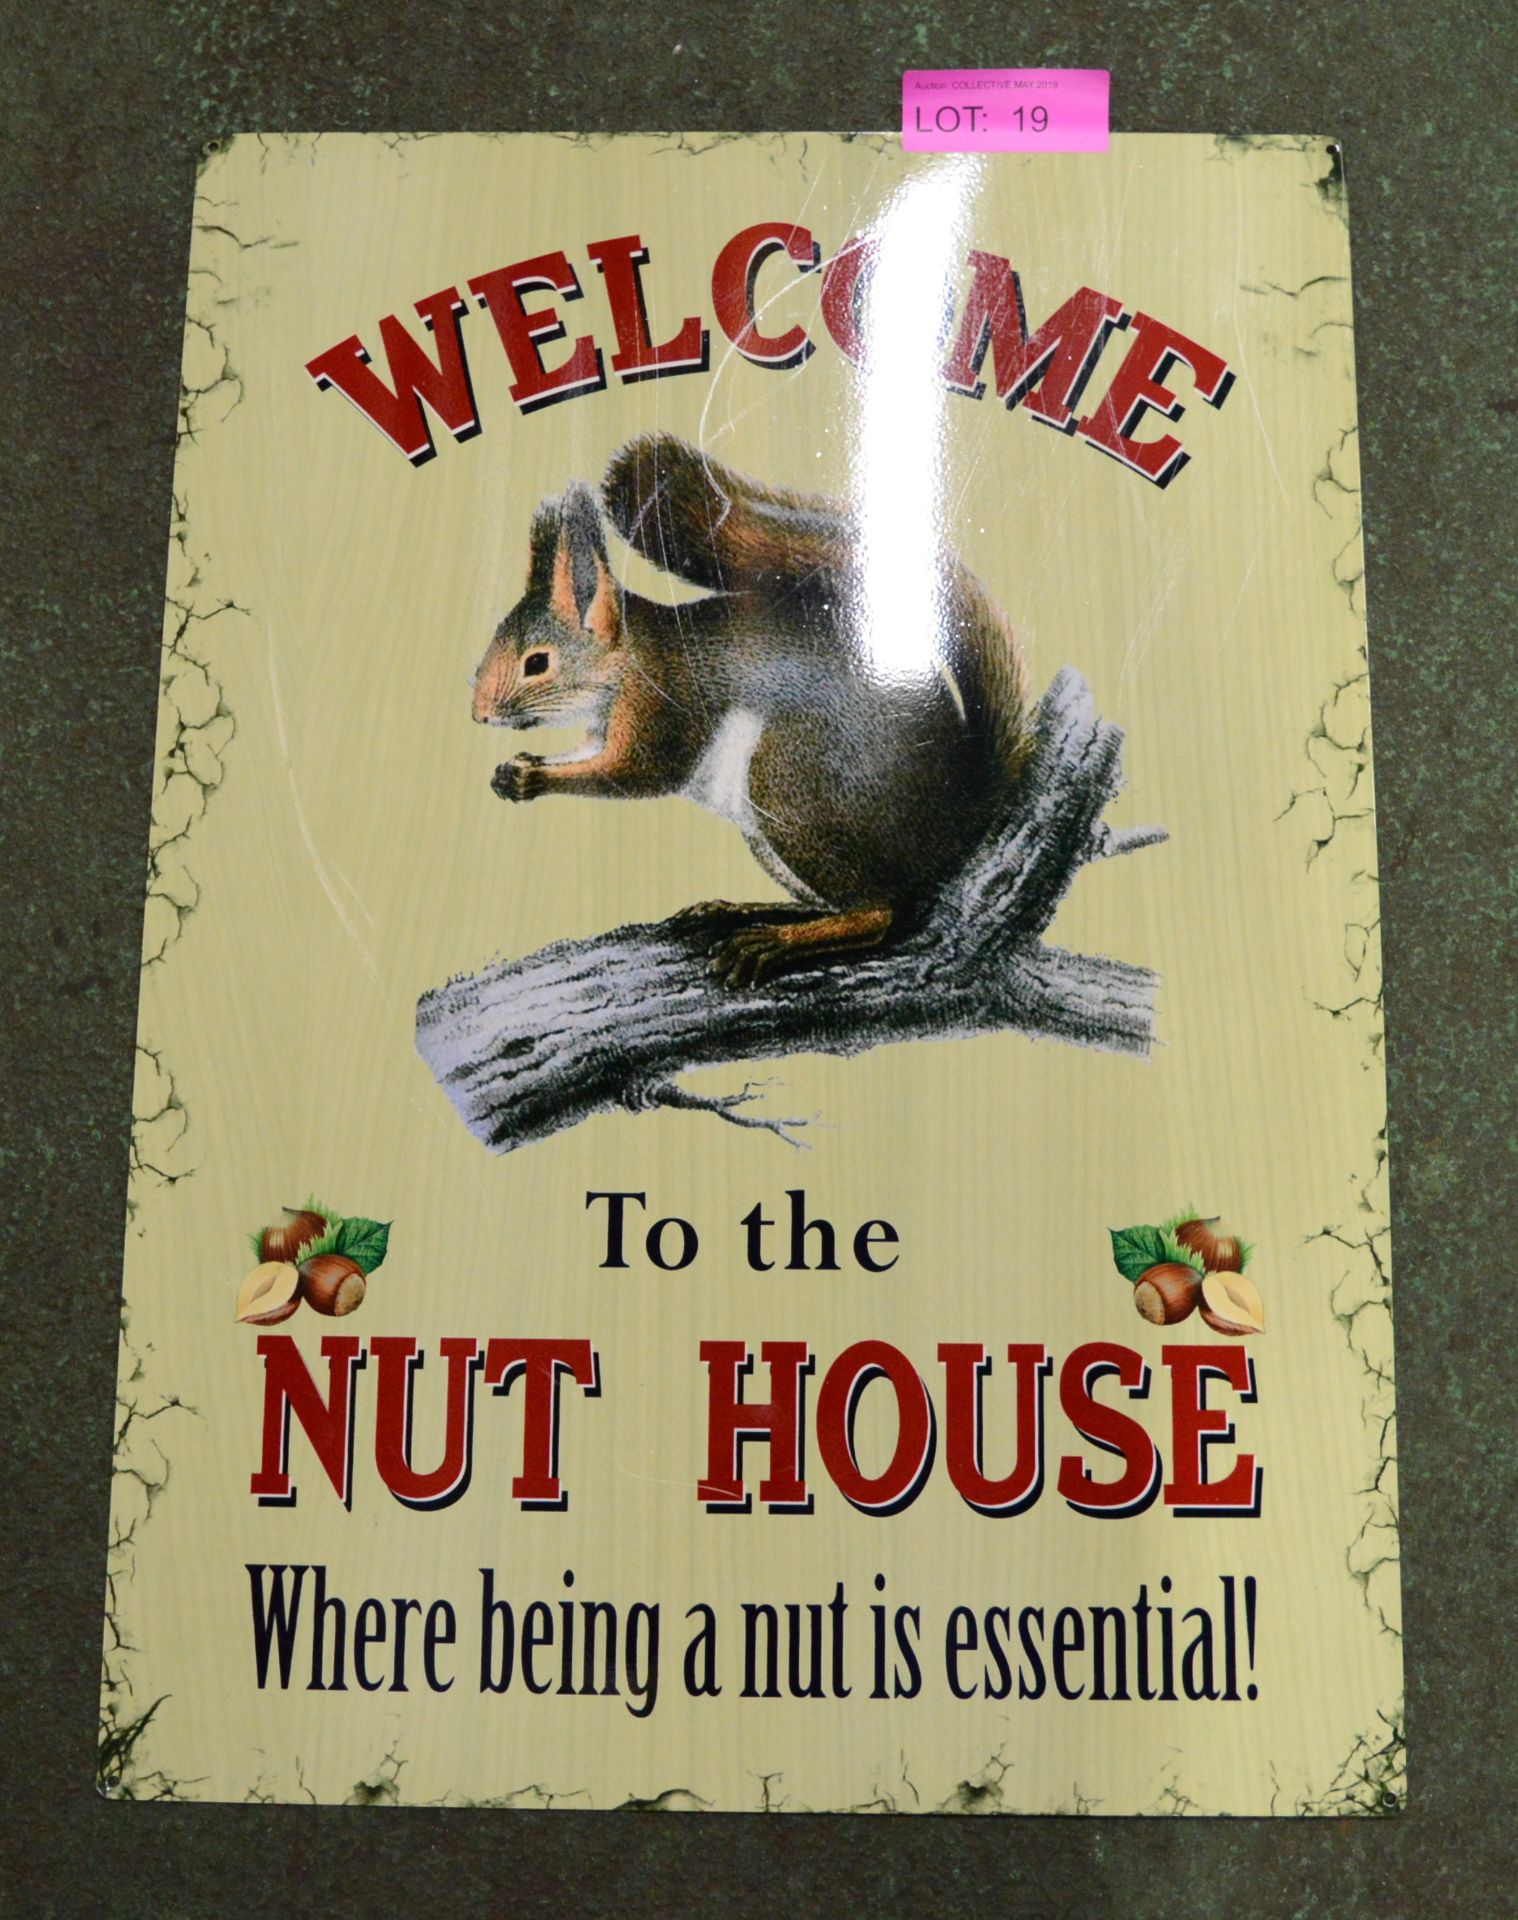 Welcome to the Nuthouse Tin Sign 700 x 500mm.